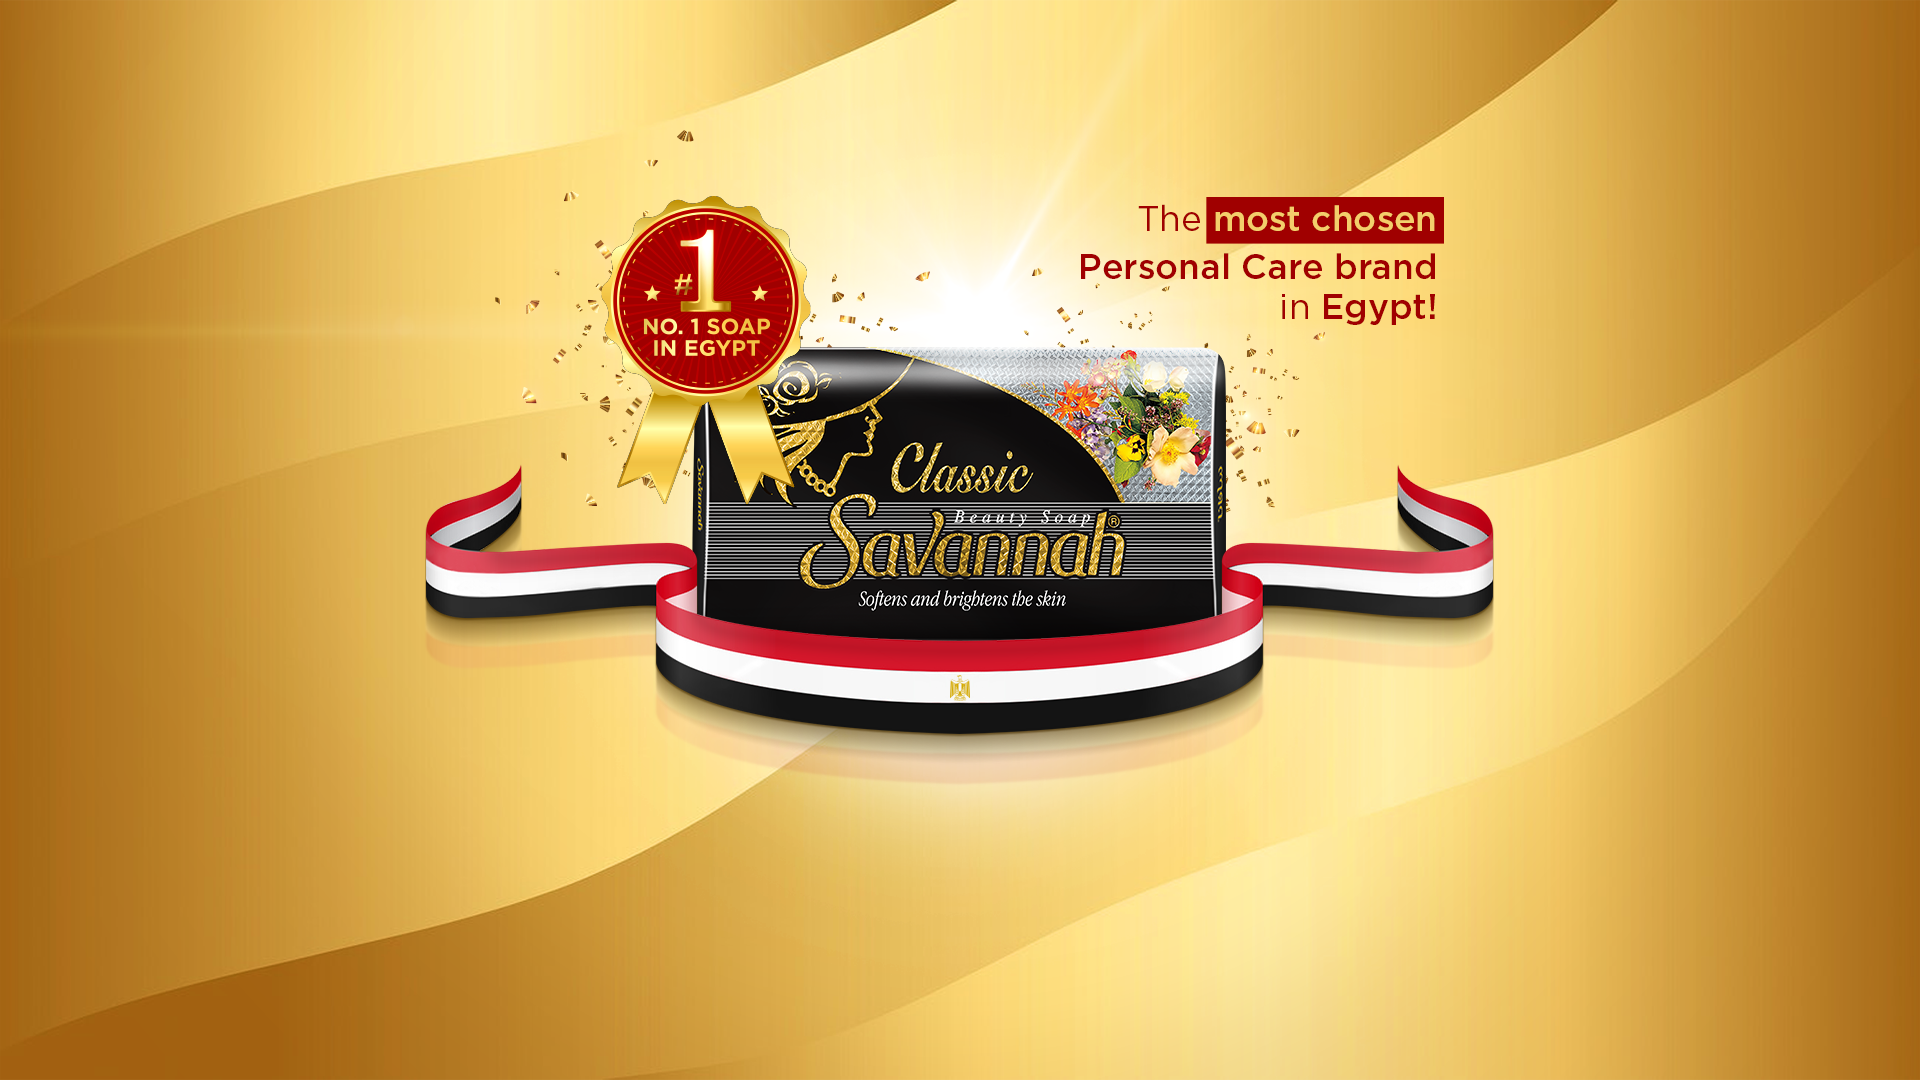 Savannah: Egypt’s most chosen brand in the Personal Care Category